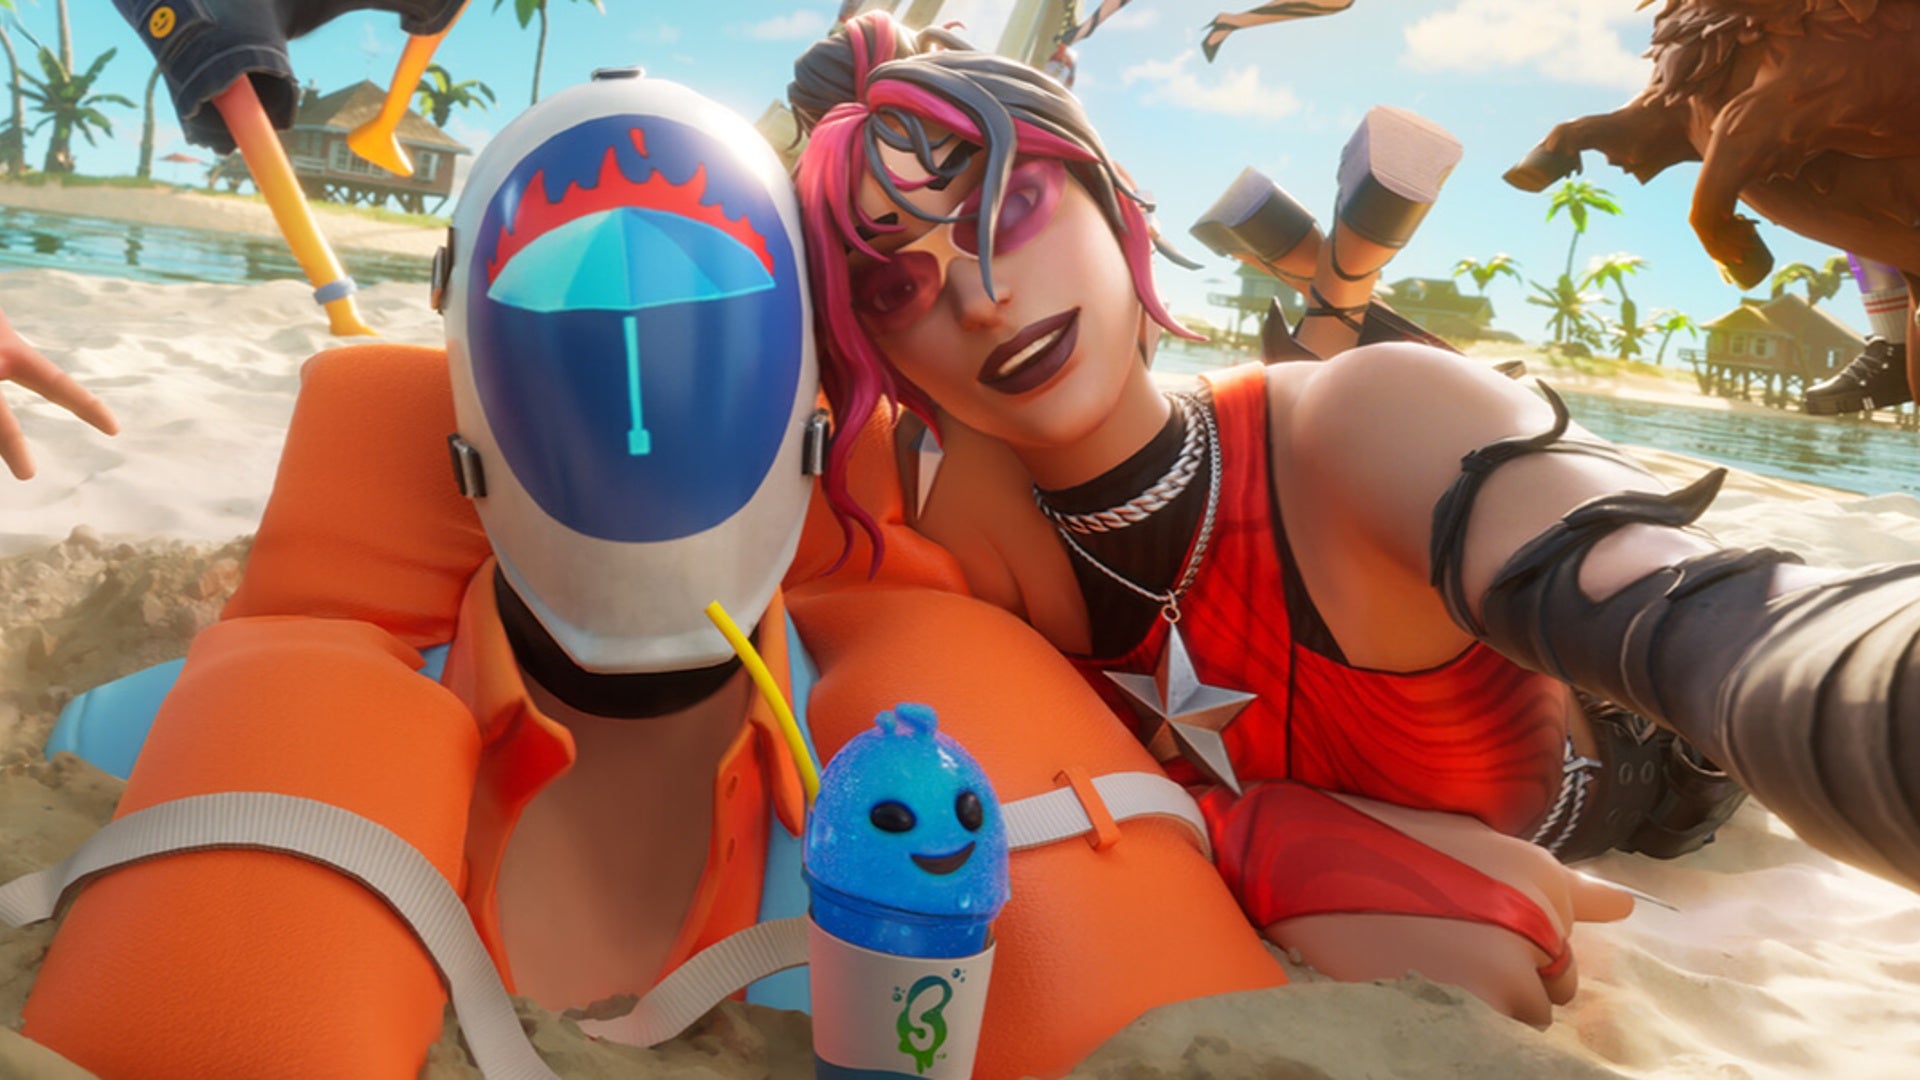 Fortnite is running a No Sweat Summer event from July 21st until August 9th, 2022.